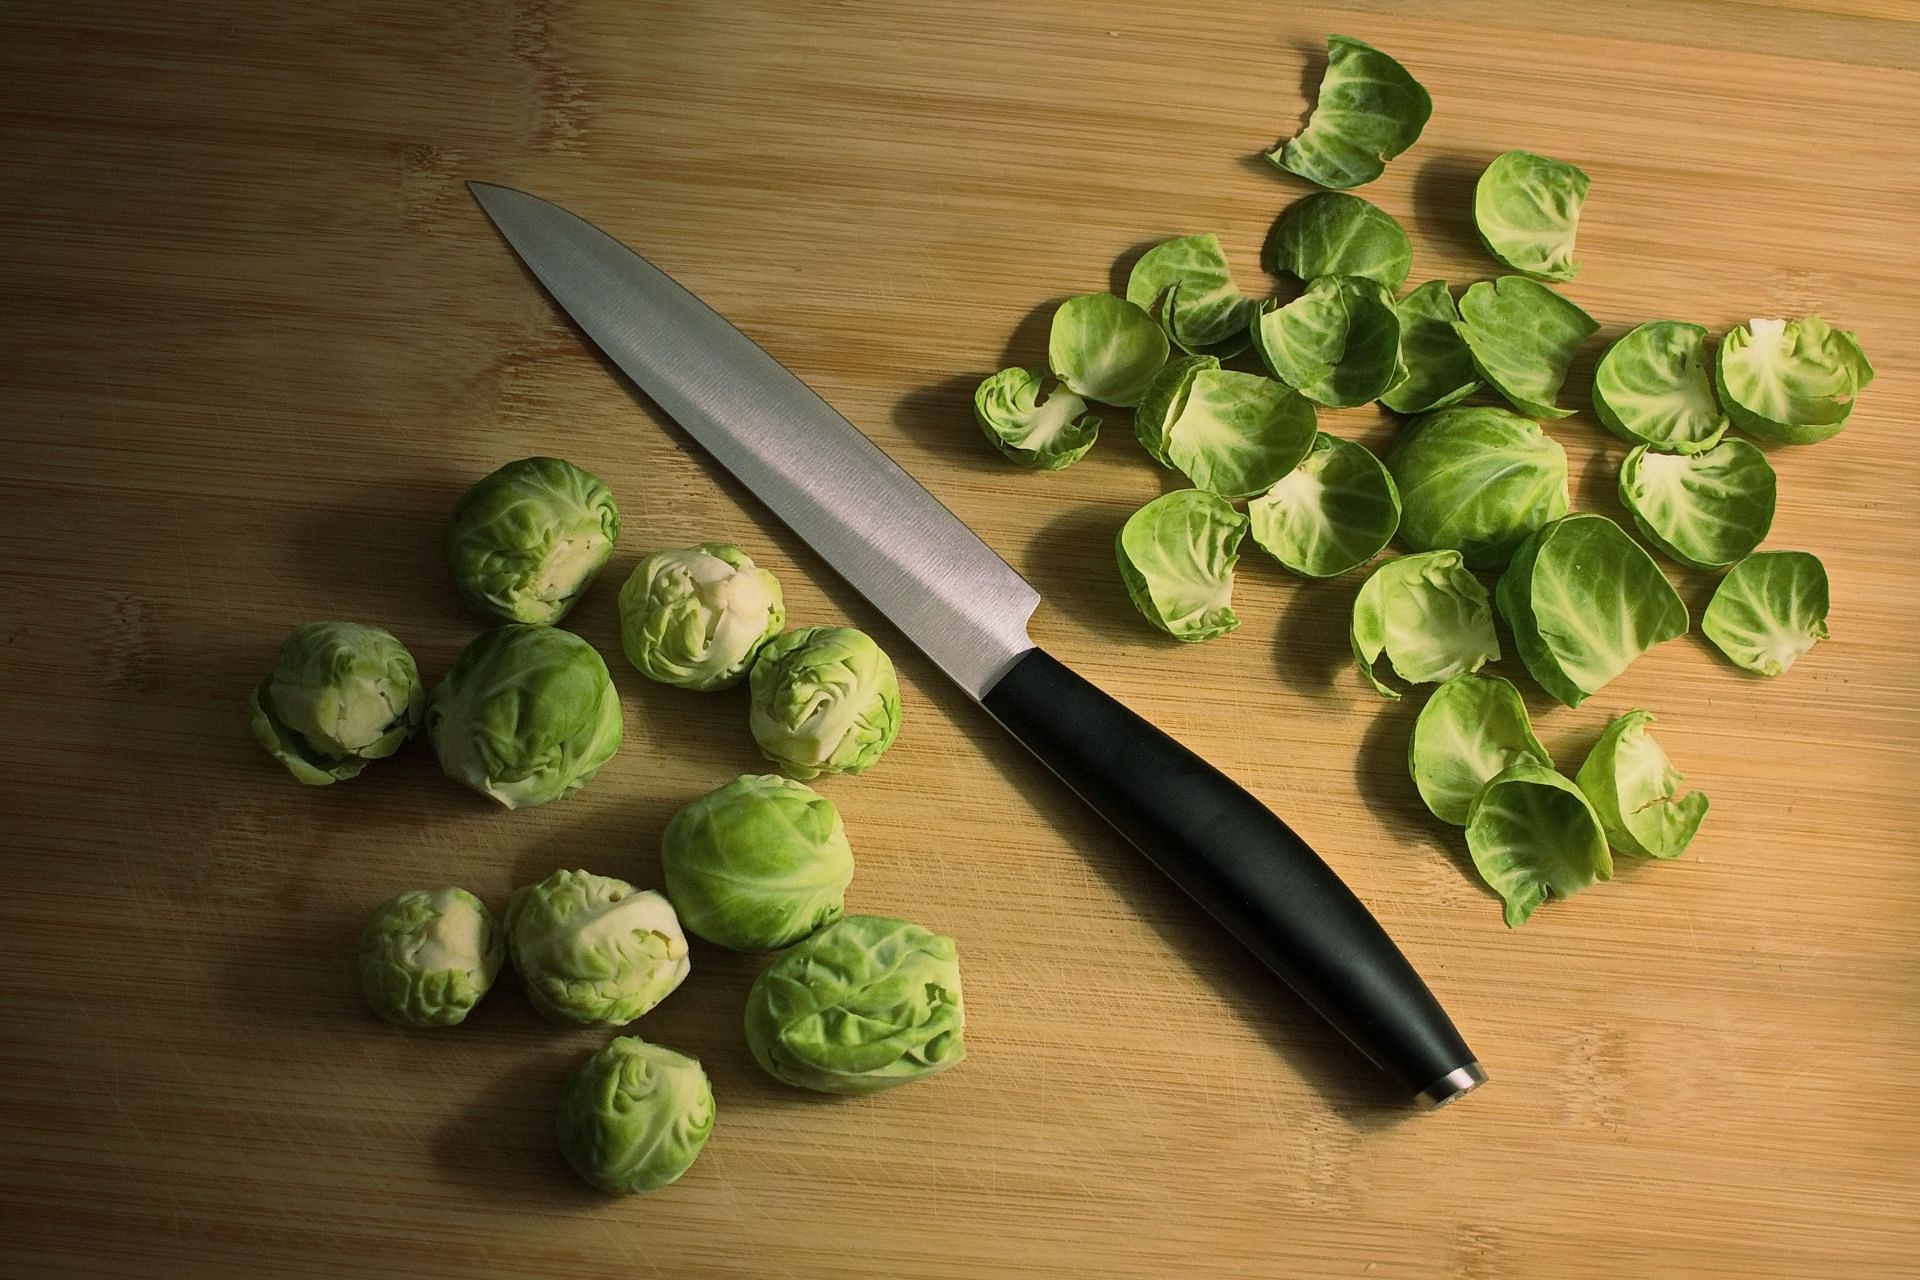 How many calories in brussels sprouts? (Image via Pexels / Damir Mijailovic)